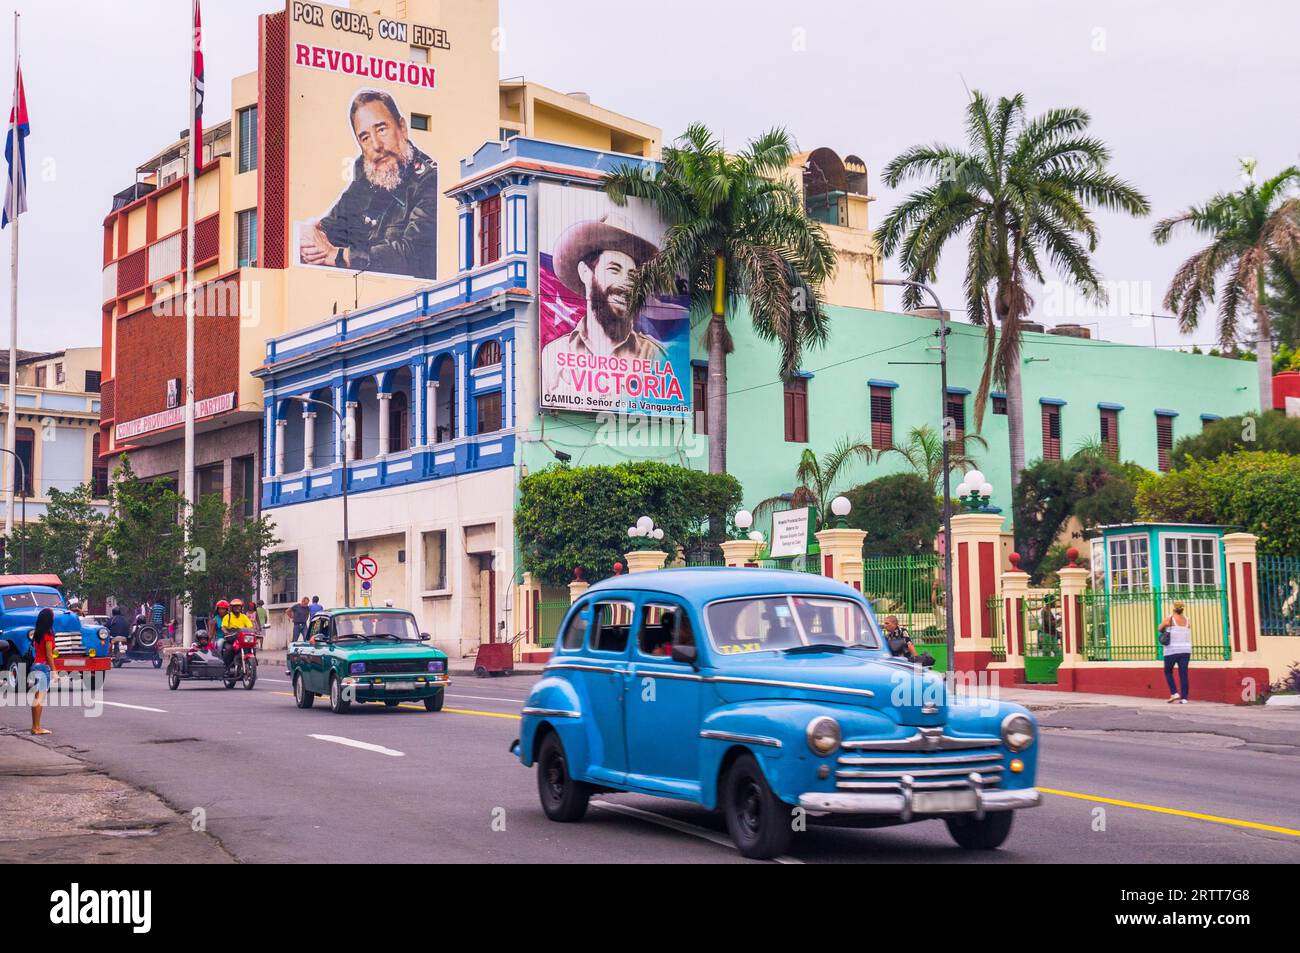 Santiago de Cuba is often referred to as birthplace of the Cuban revolucion. Posters of Fidel Castro advertise the revolution, Santiago de Cuba, CUBA Stock Photo